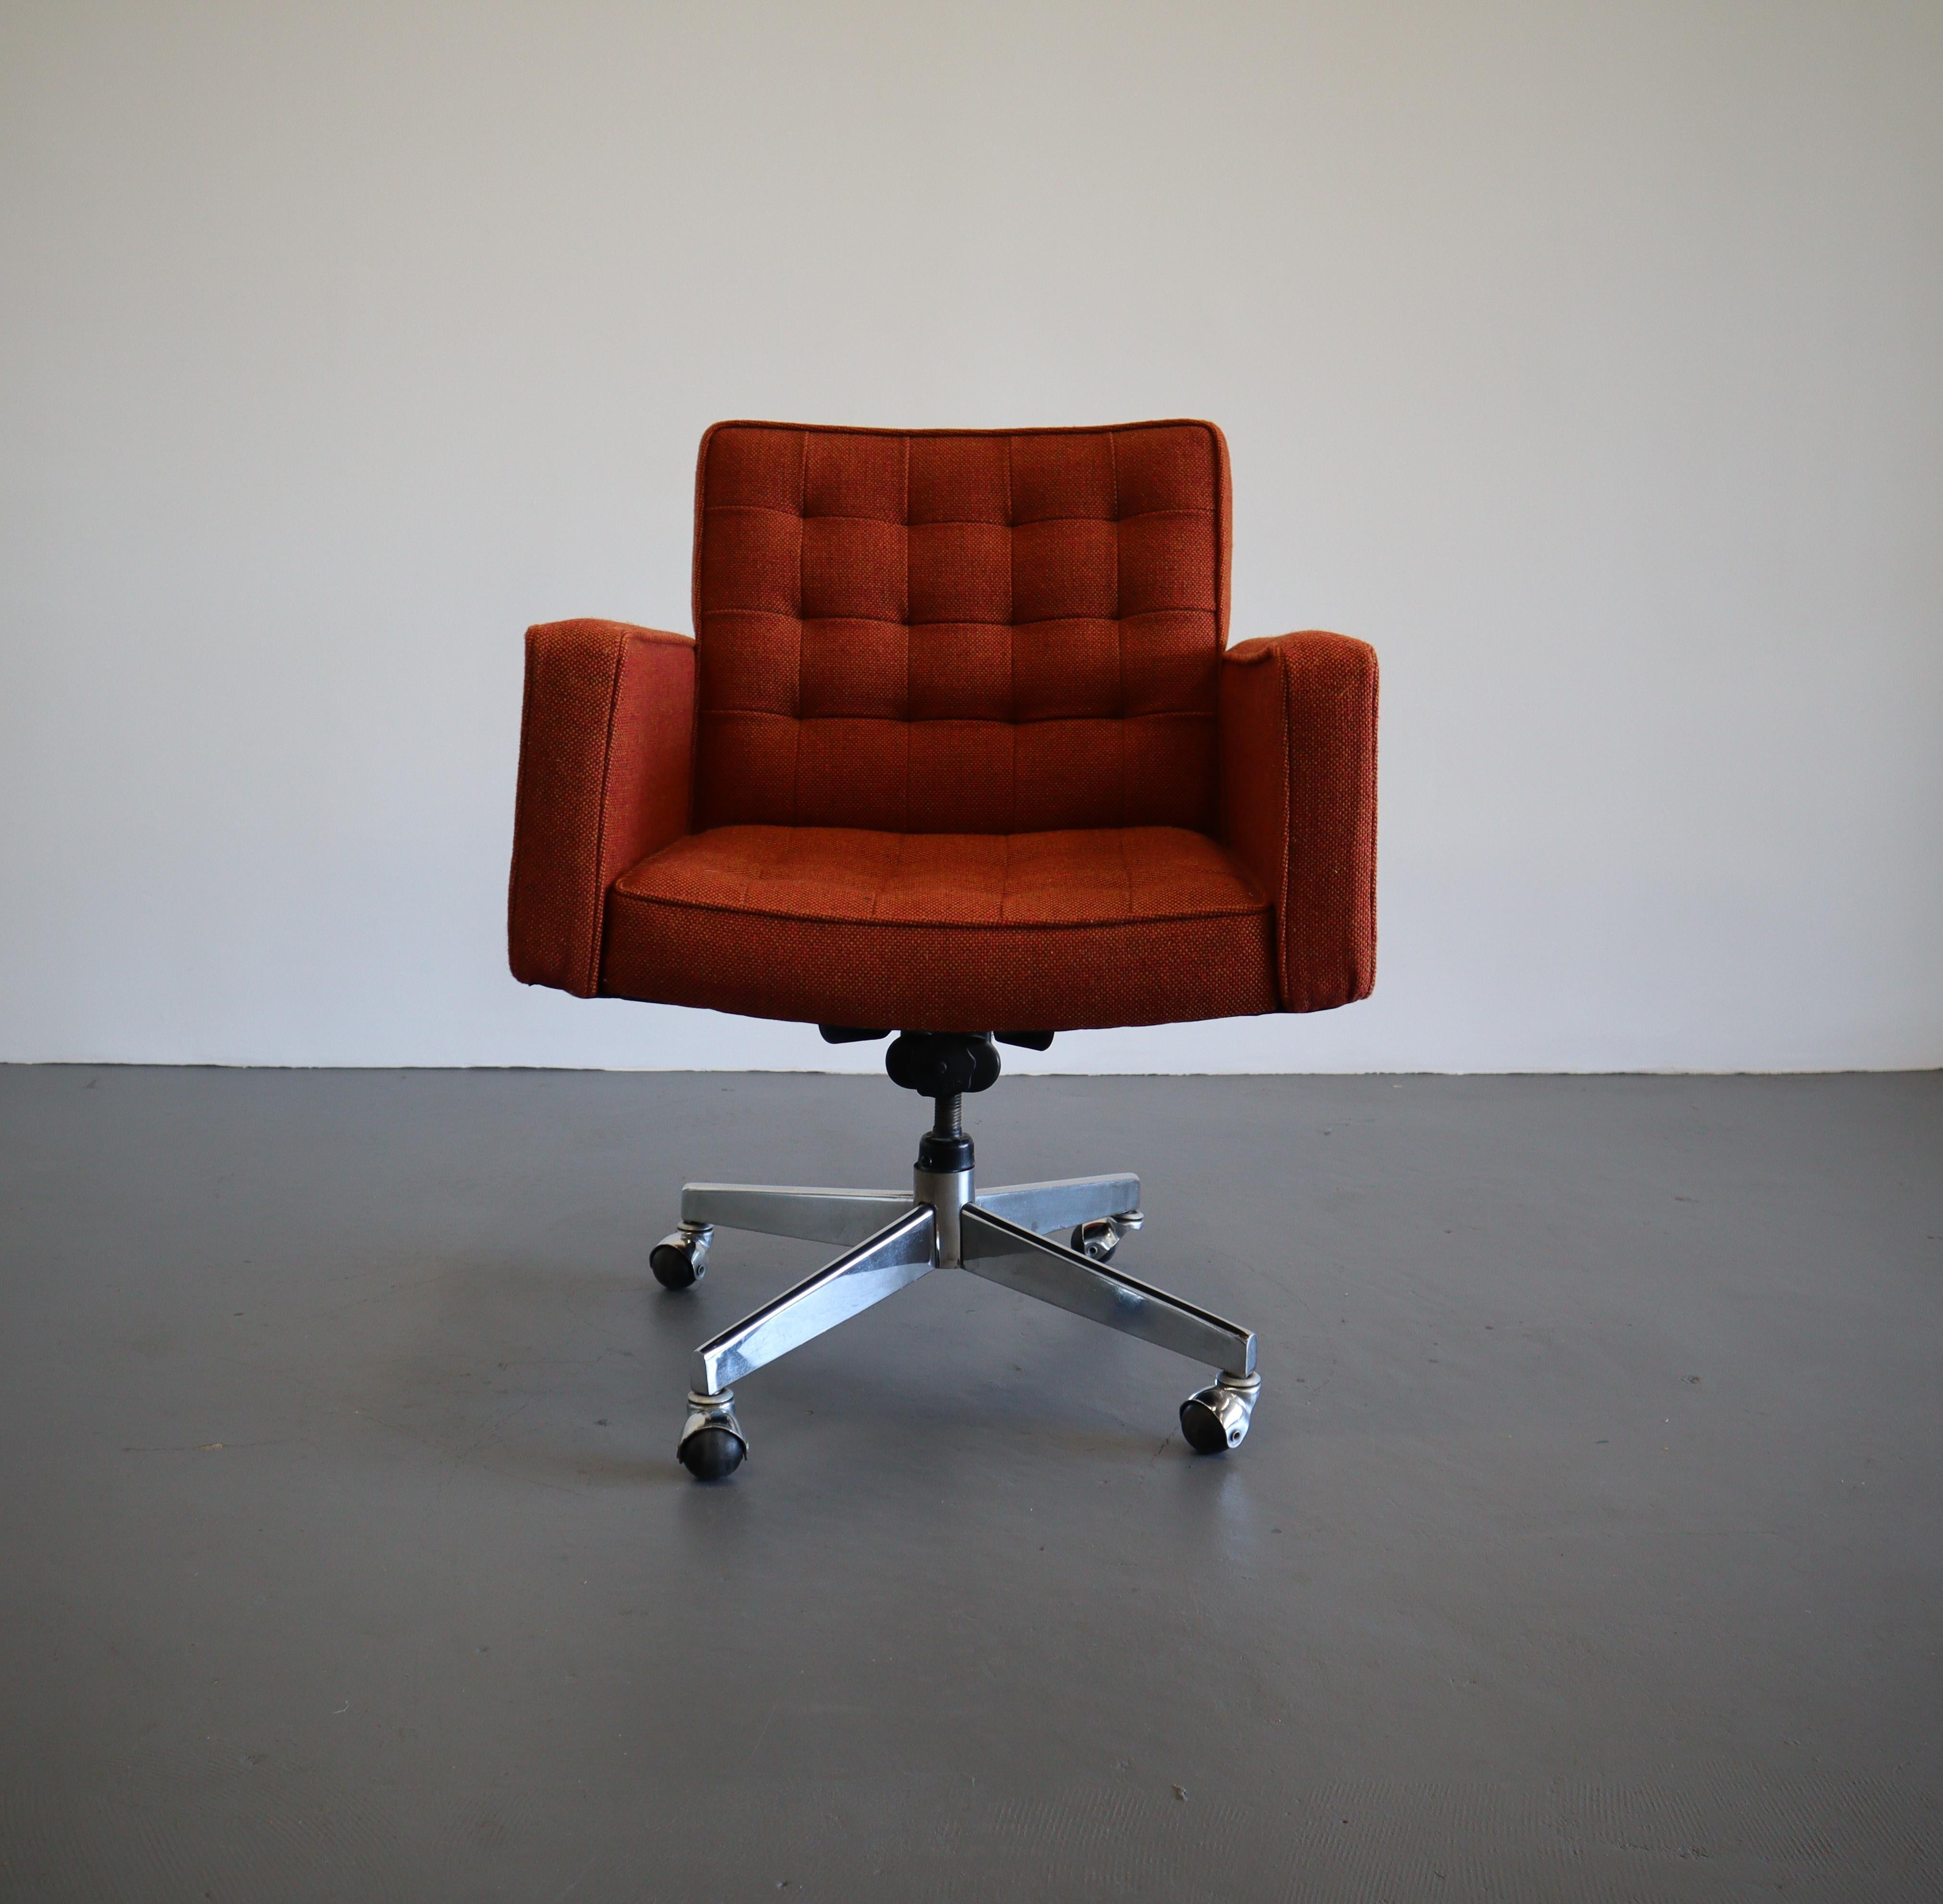 Brilliant amber color desk chair designed by Vincent Cafiero for Knoll. This low-back desk chair has distinct high profile armrests, a deep seat and four star caster base. The new upholstery is a high performance Herman Miller fabric, simplistic and